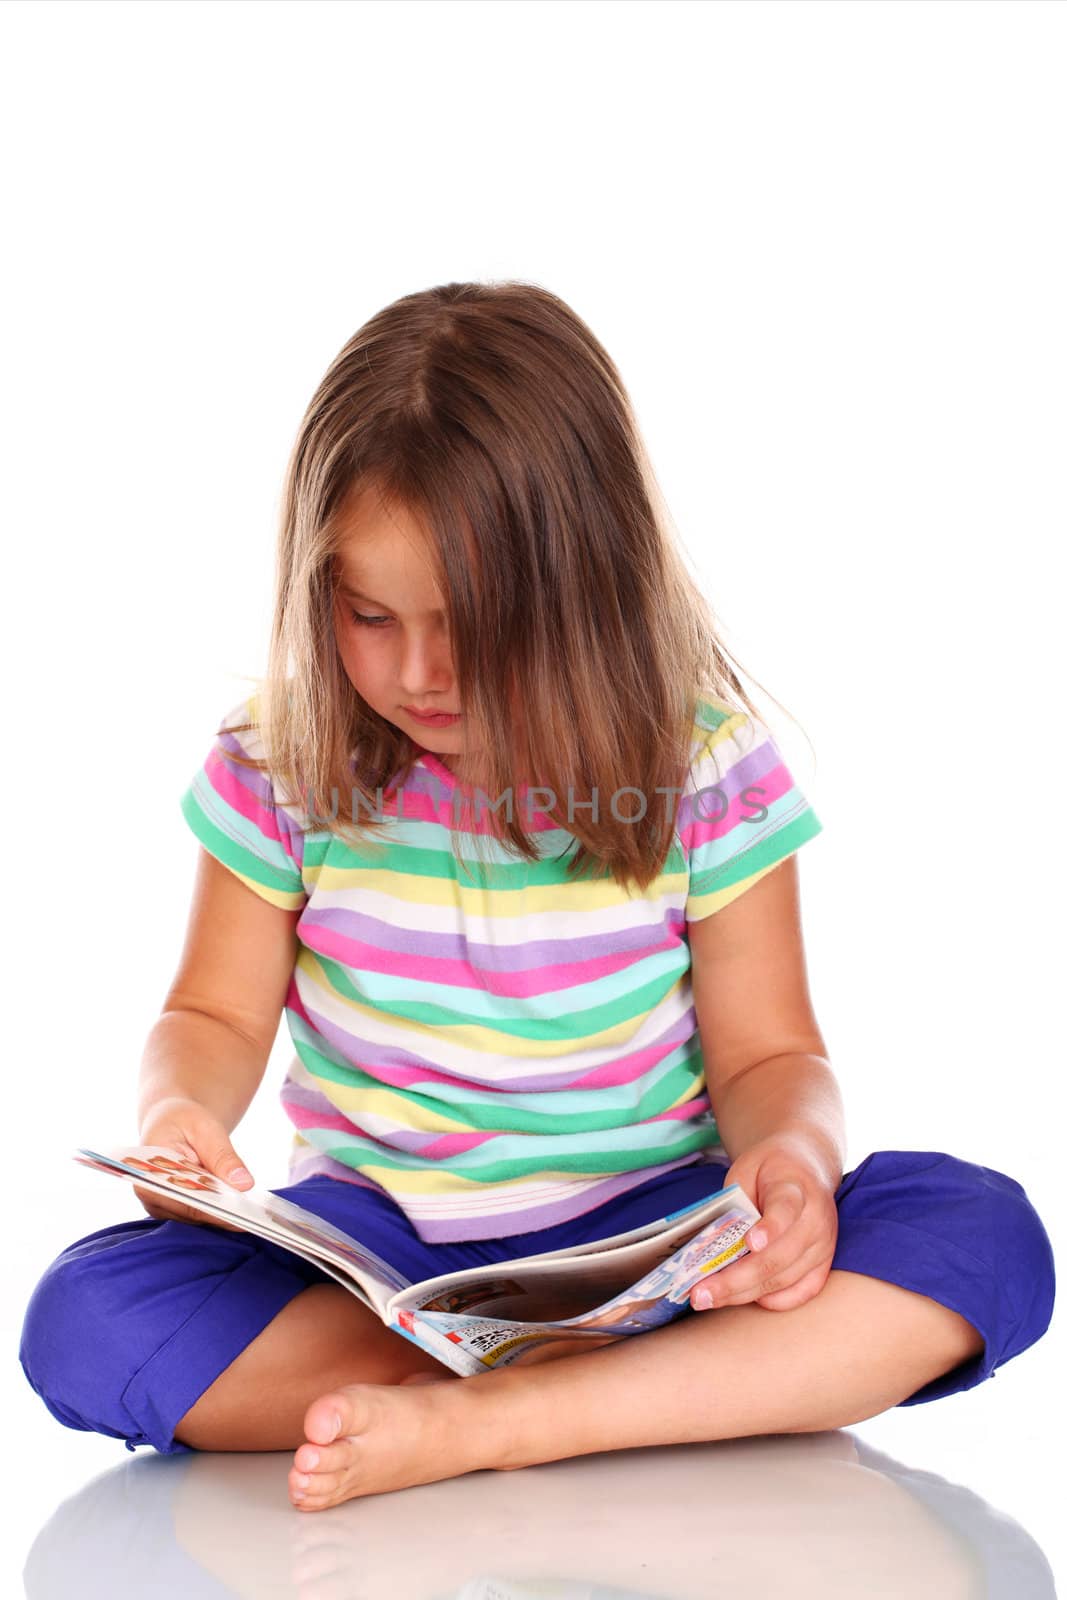 Cute little girl reading book isolated on white